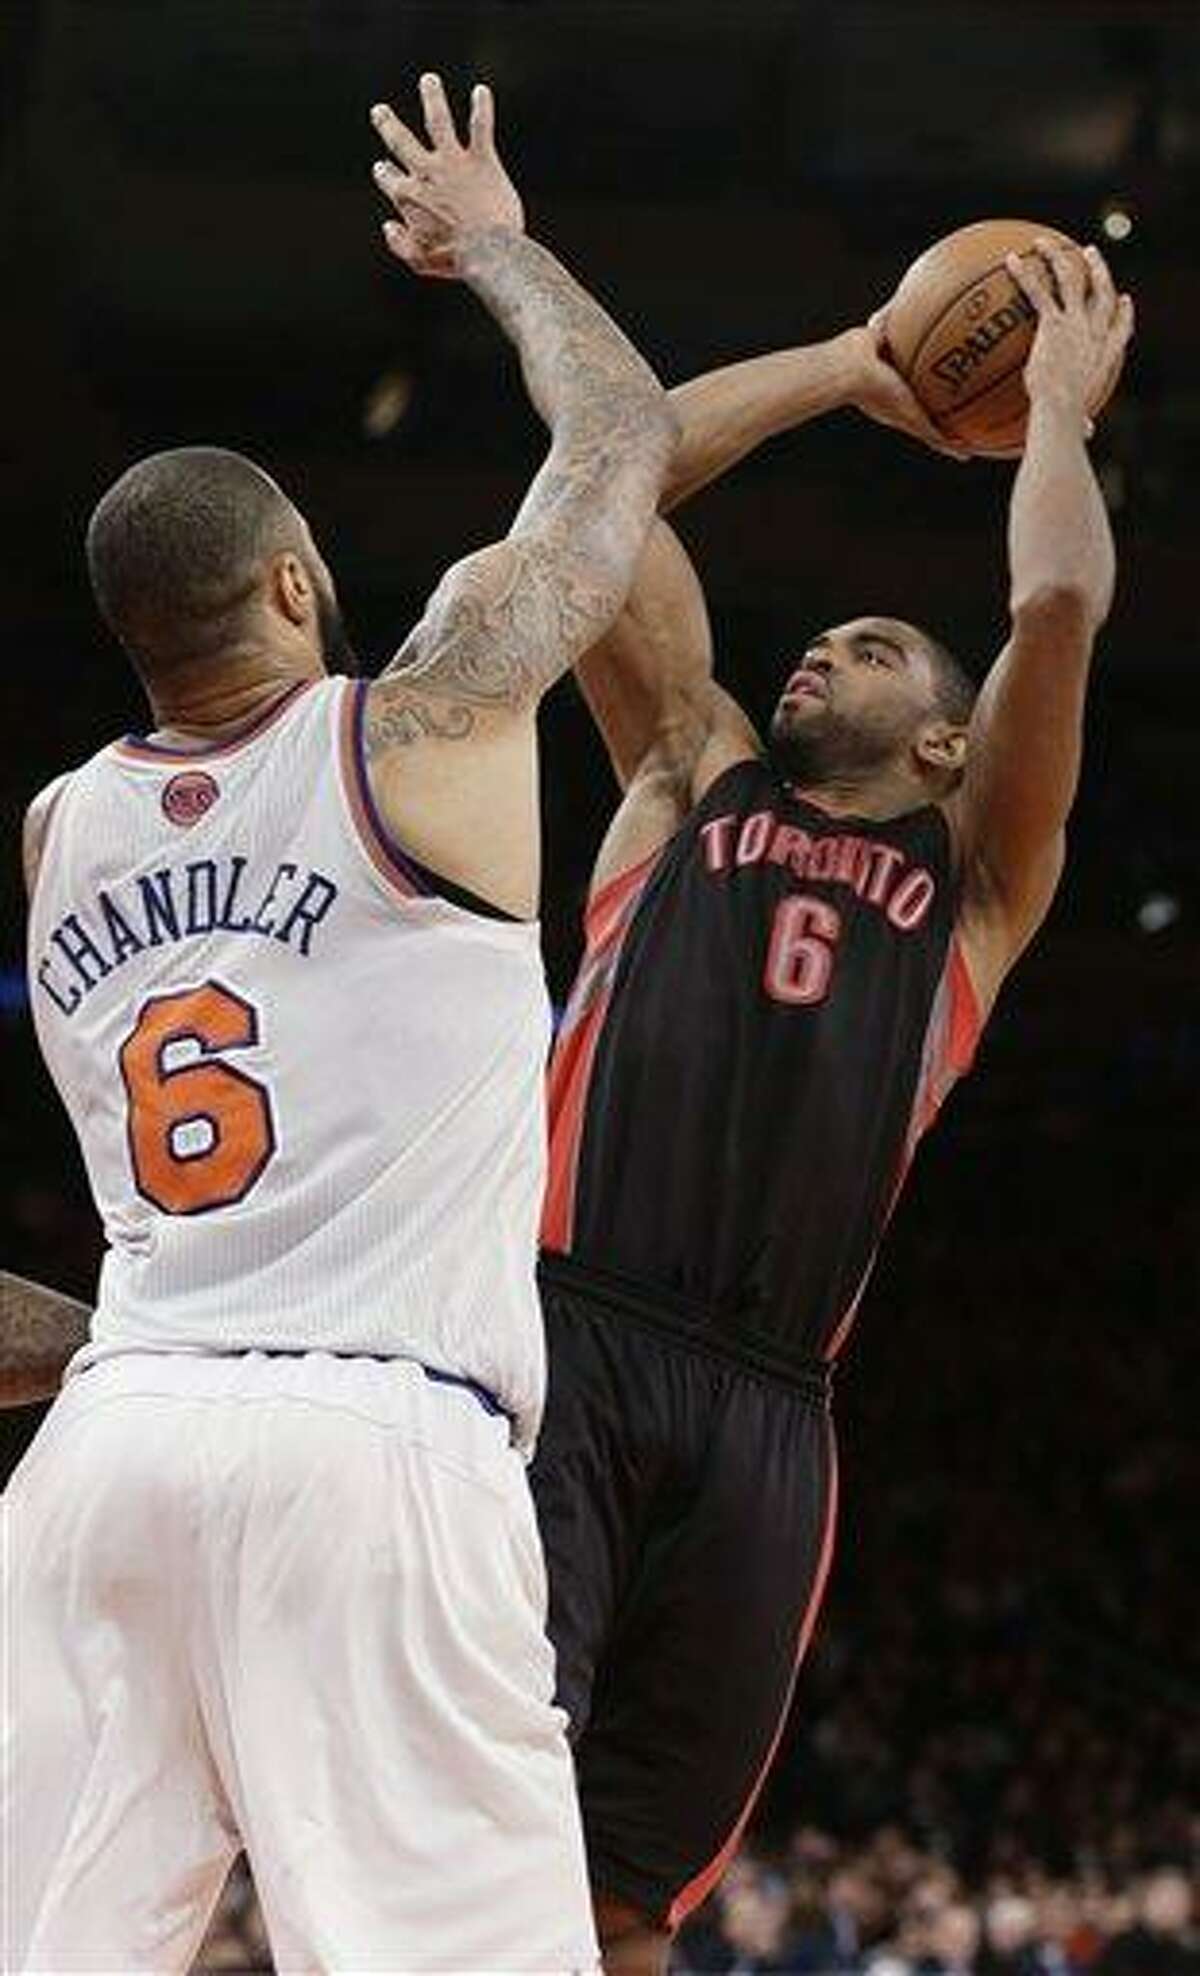 Toronto Raptors' Alan Anderson (6) shoots over New York Knicks' Tyson Chandler (6) during the second half of an NBA basketball game Wednesday, Feb. 13, 2013, in New York. Anderson scored 26 points as the Raptors won 92-88. (AP Photo/Frank Franklin II)